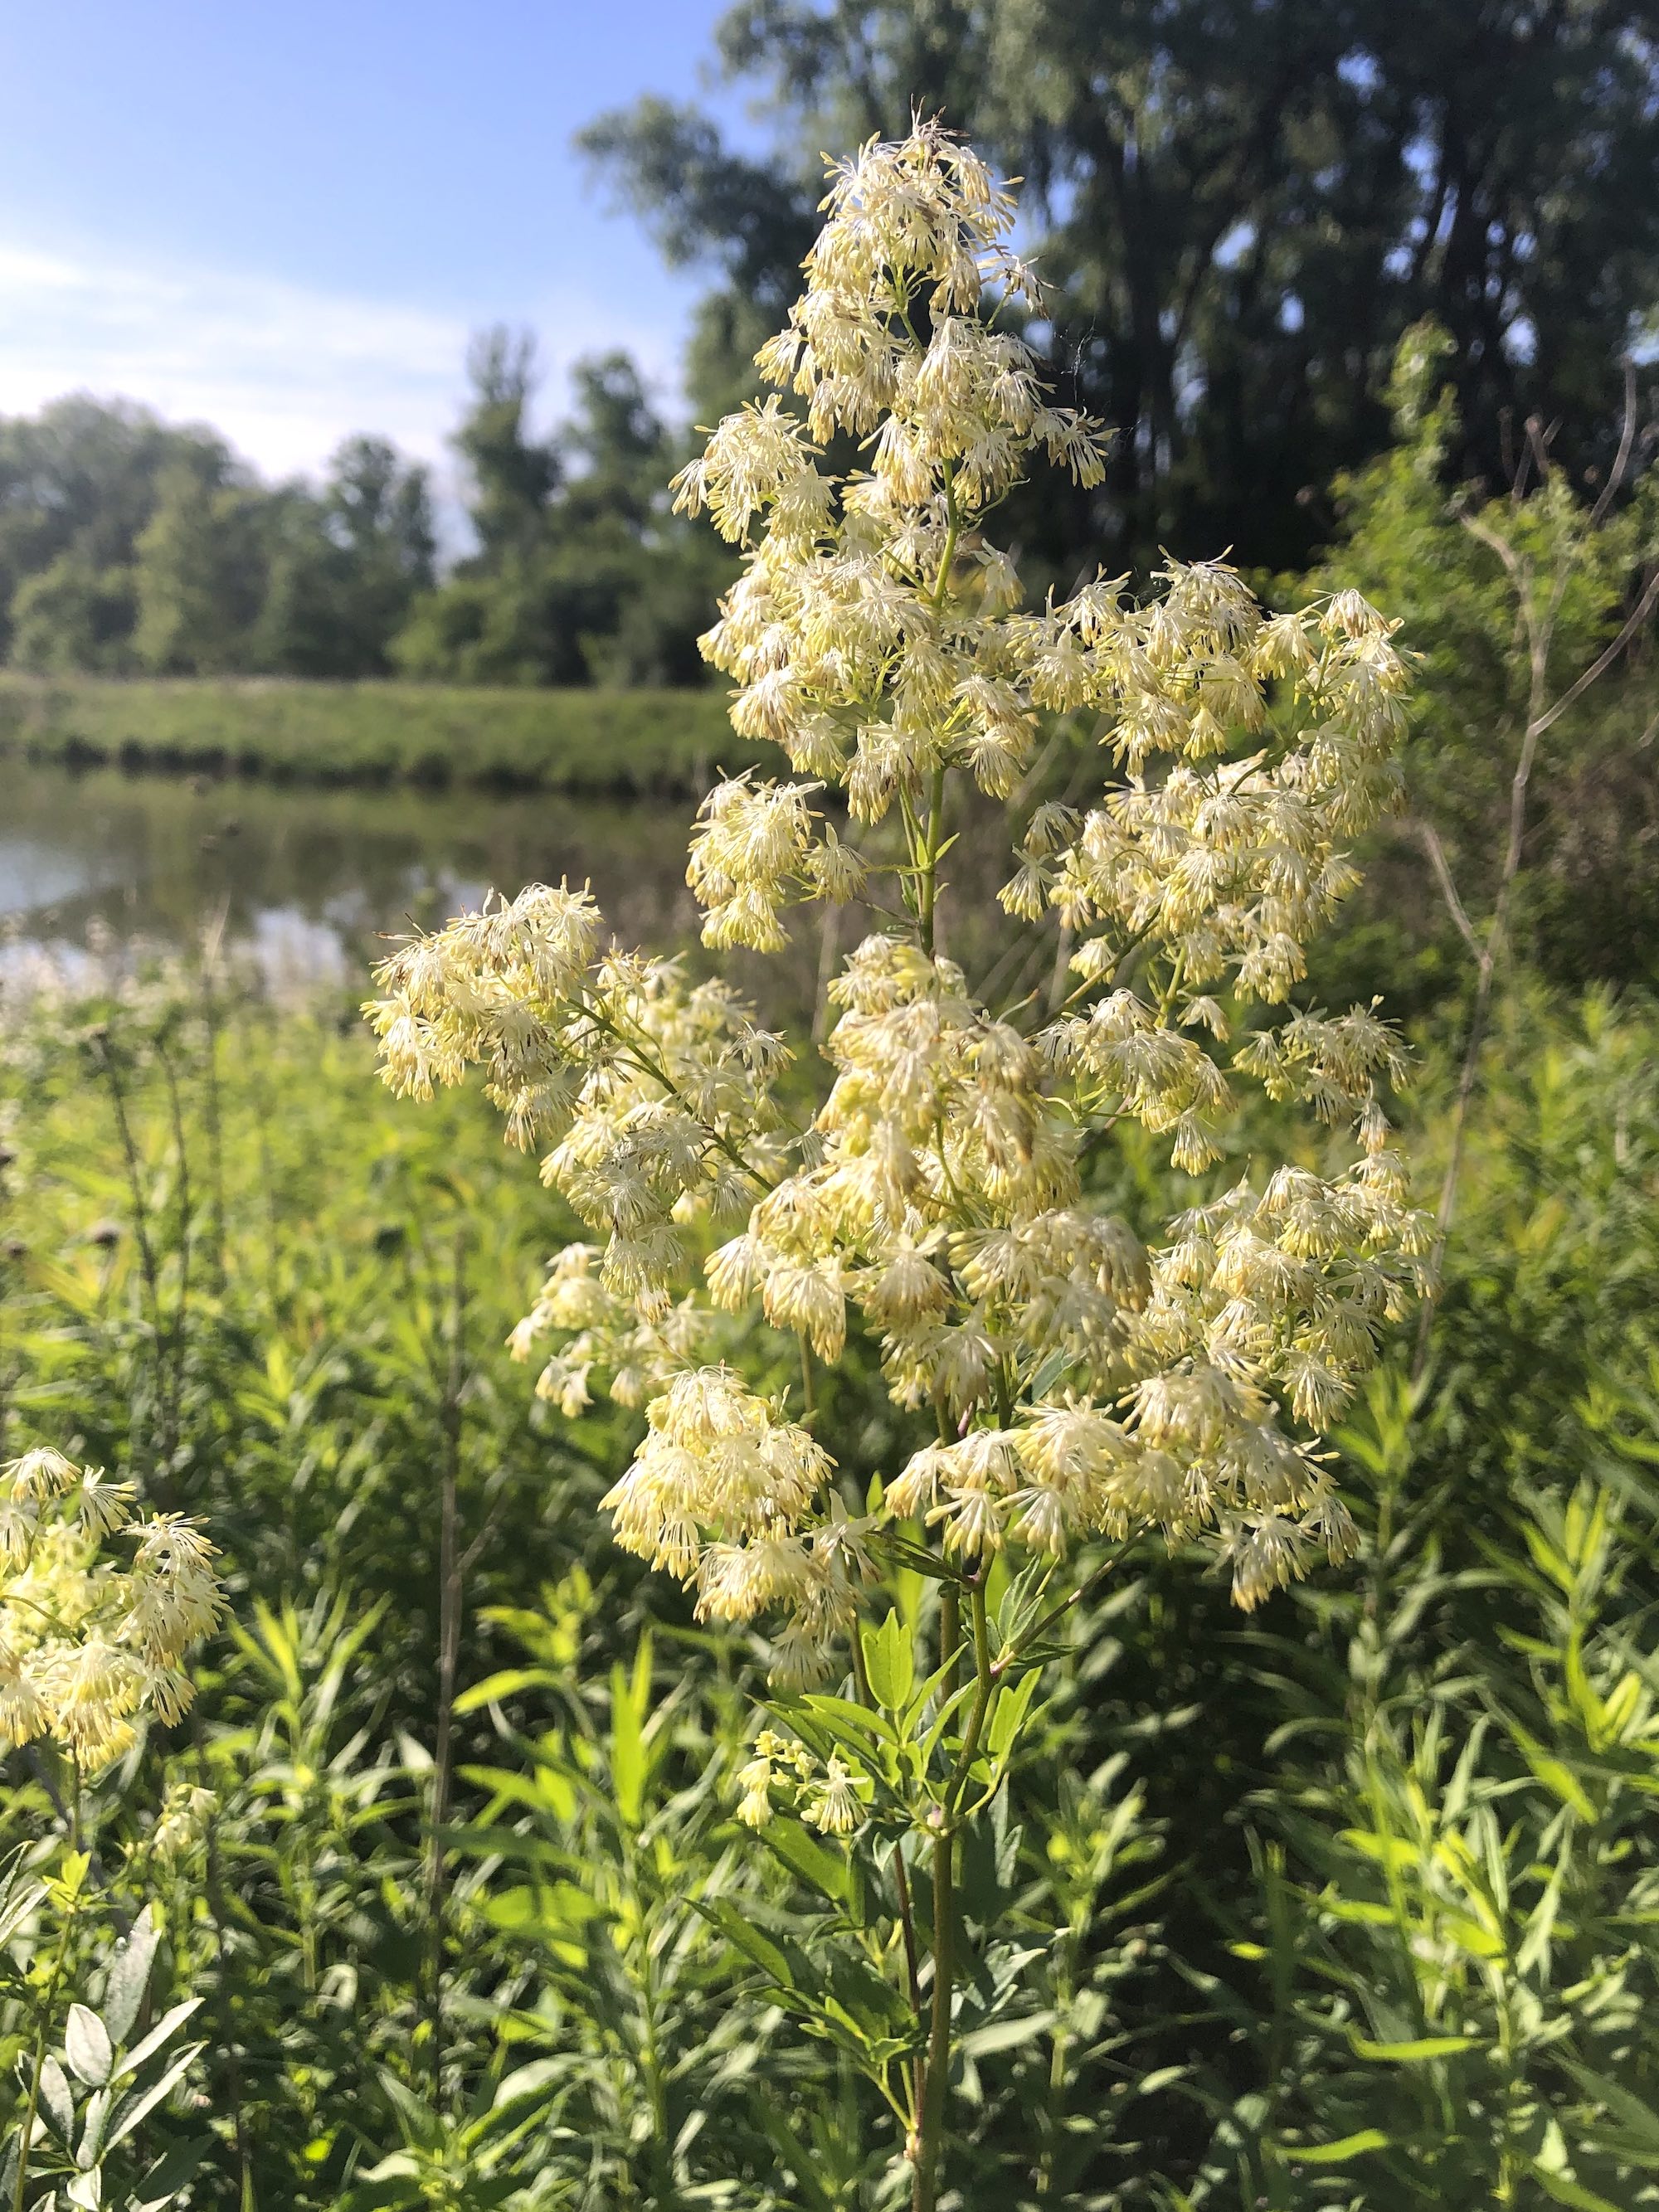 Tall Meadow-rue on shore of Retaining Pond on June15, 2020.